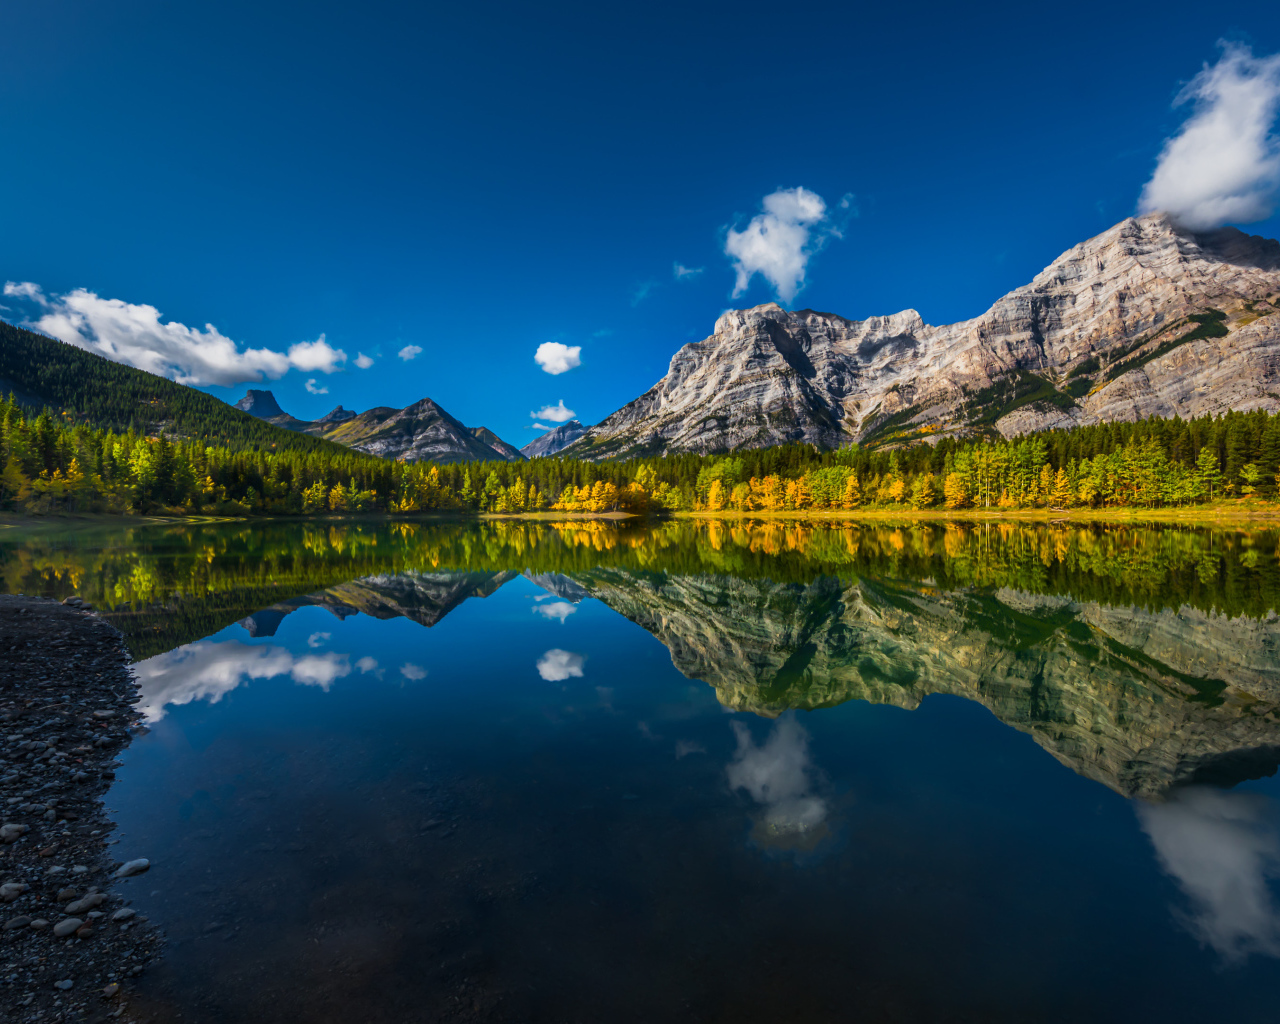 Mountains are reflected in the lake, Canada